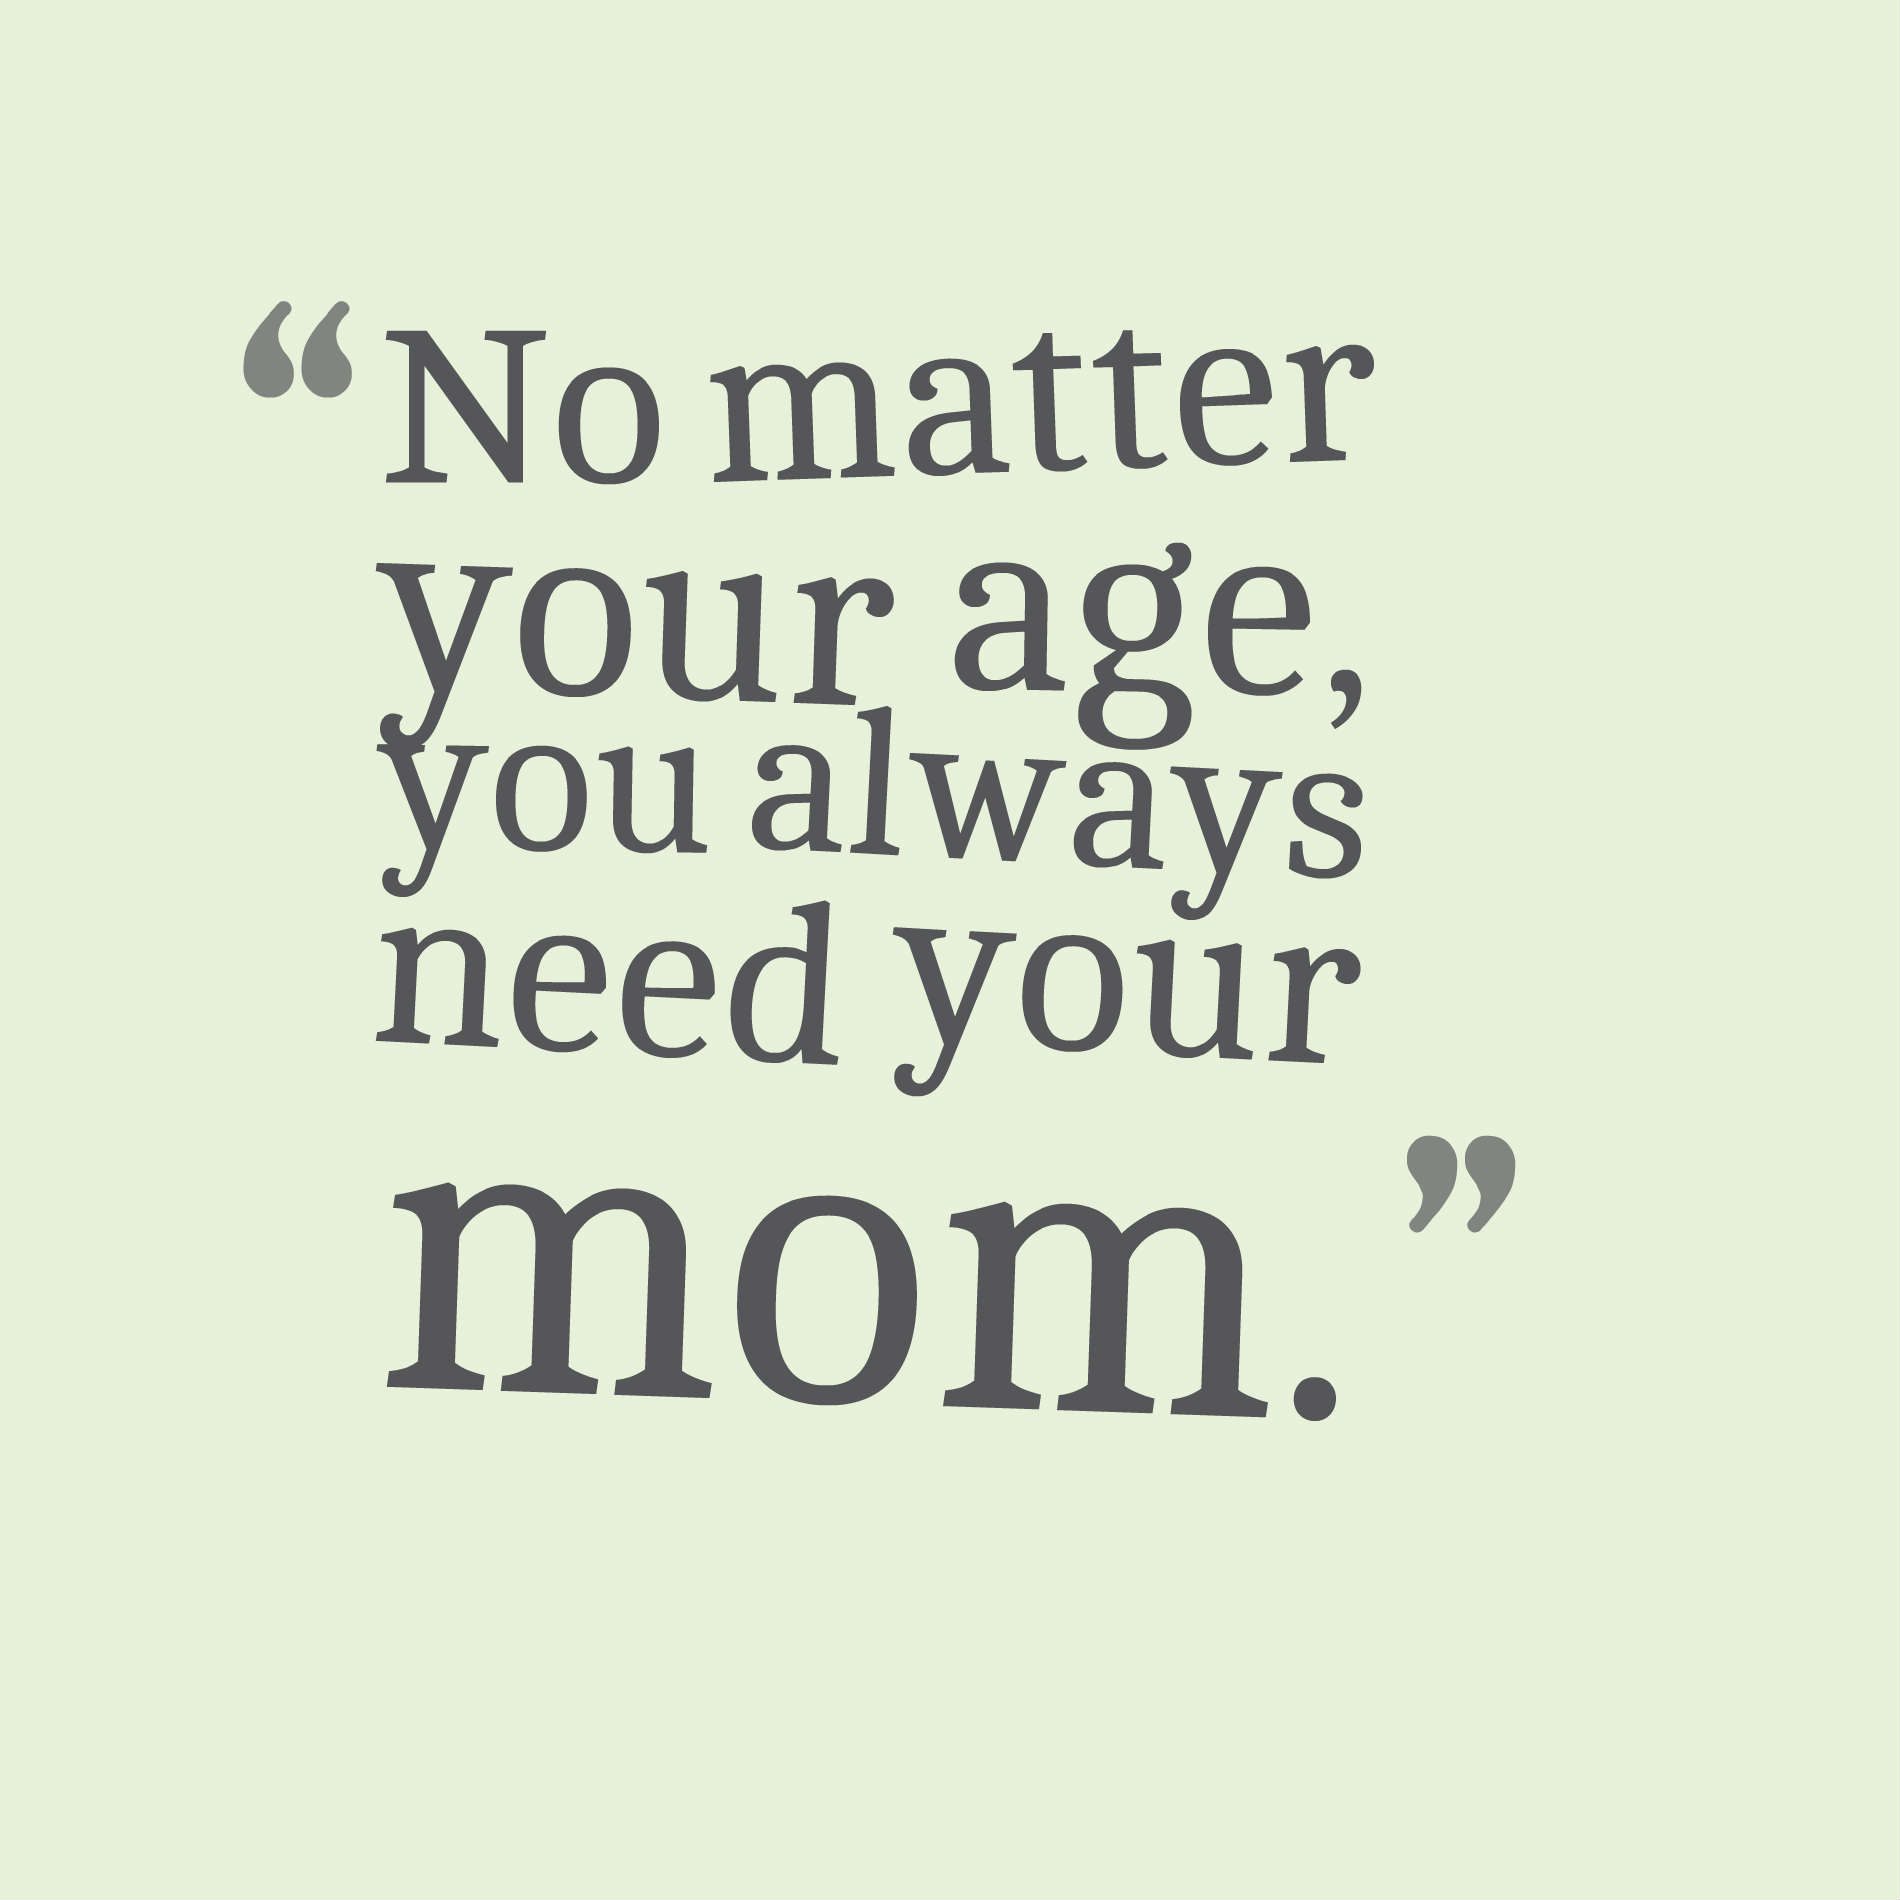 No matter your age, you always need your mom.